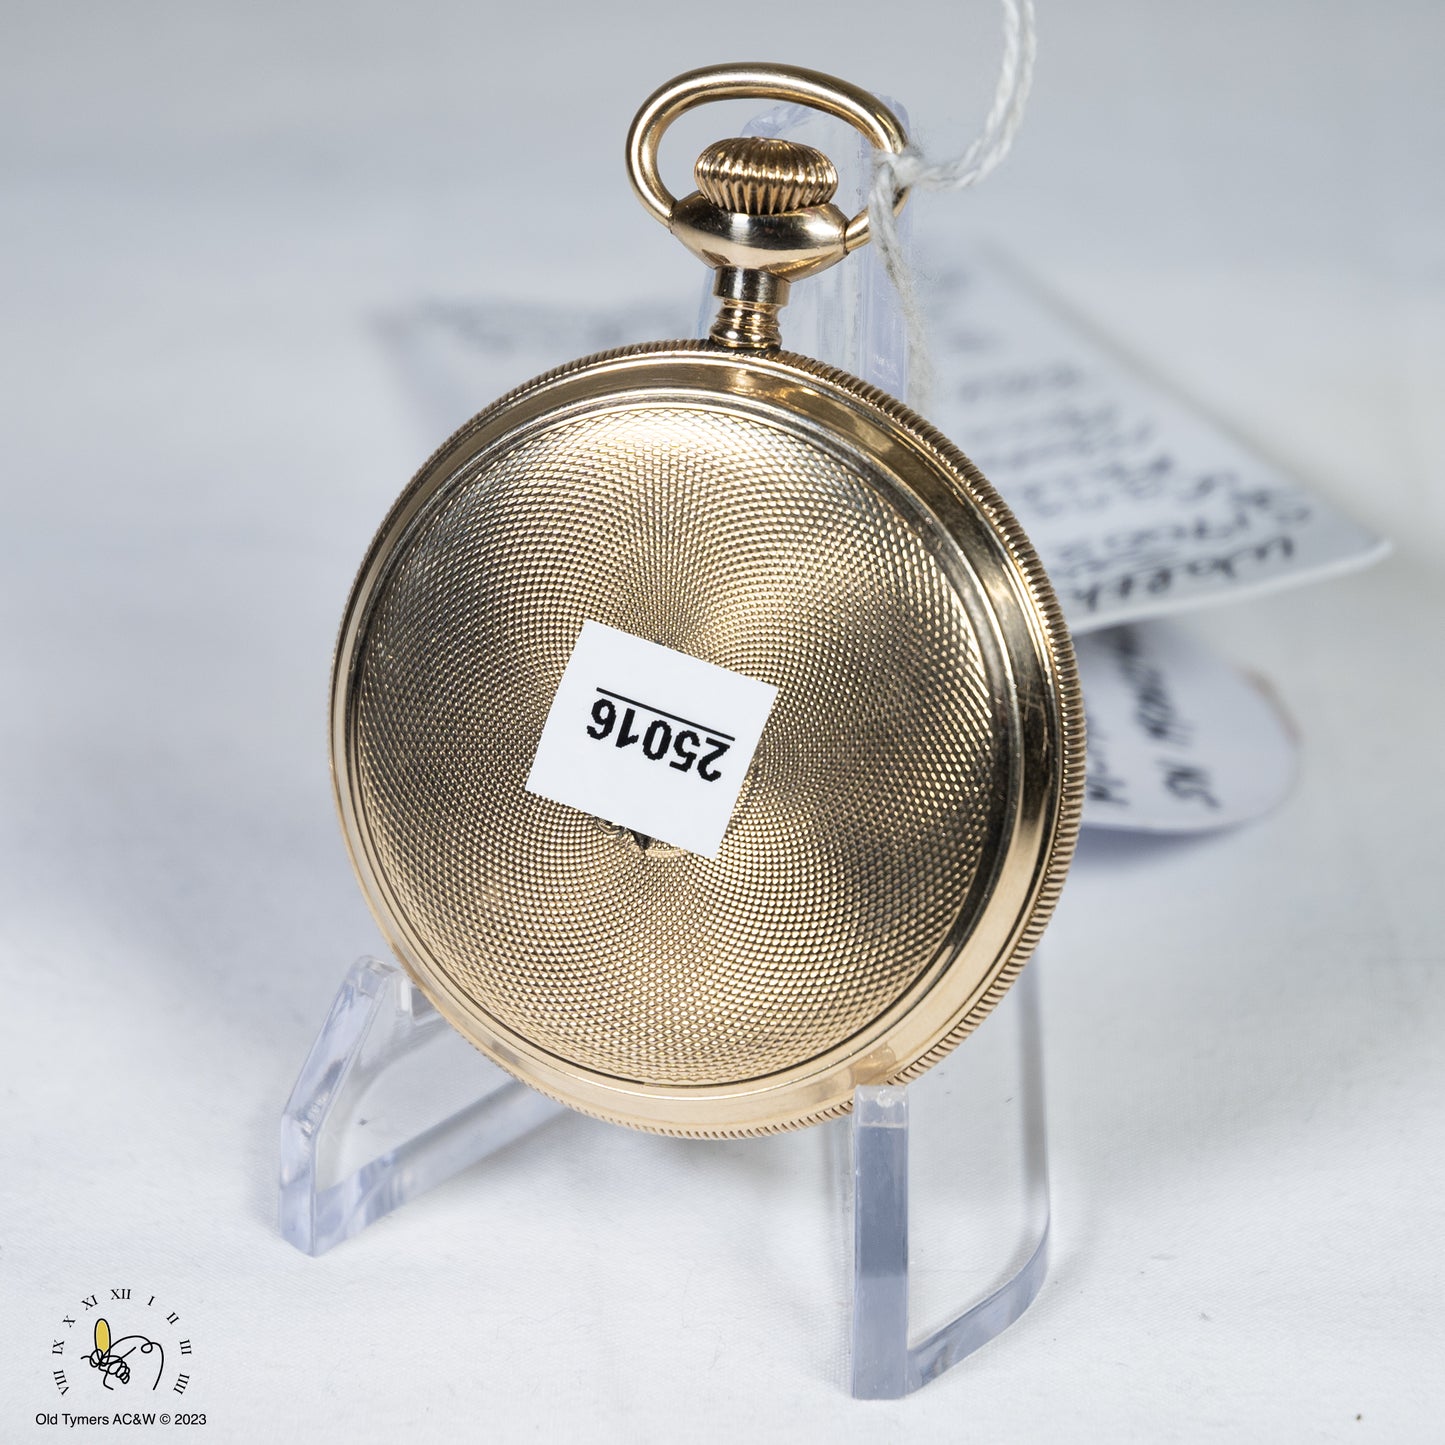 Canadian Railroad Time Service Pocket Watch